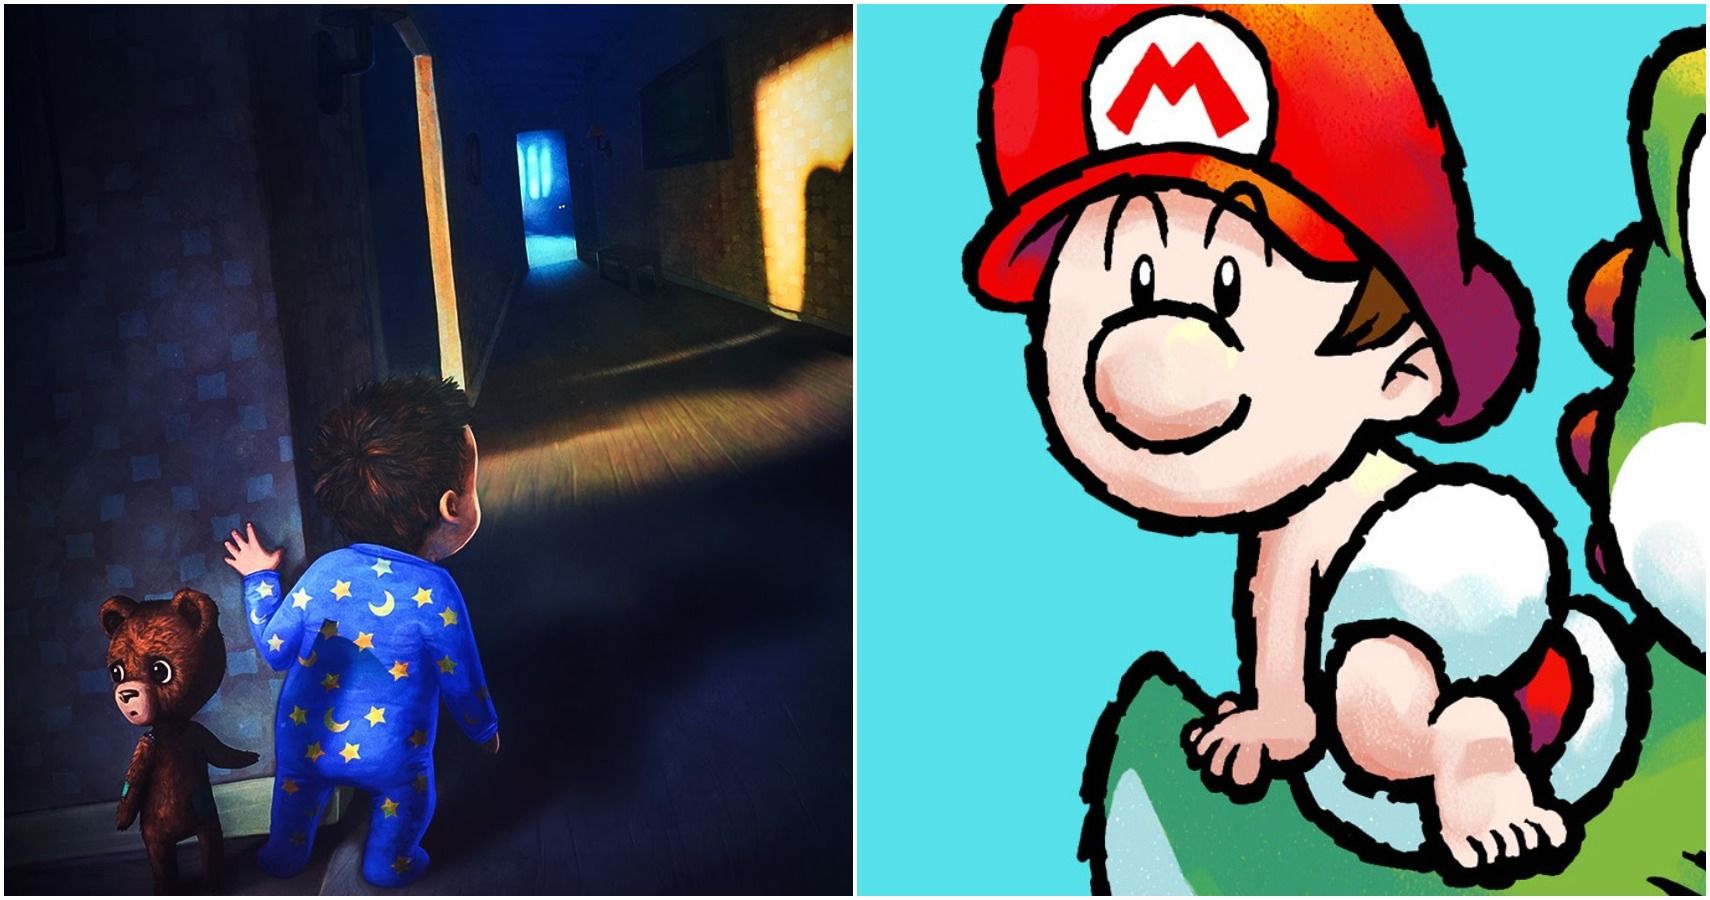 split image of baby and baby mario